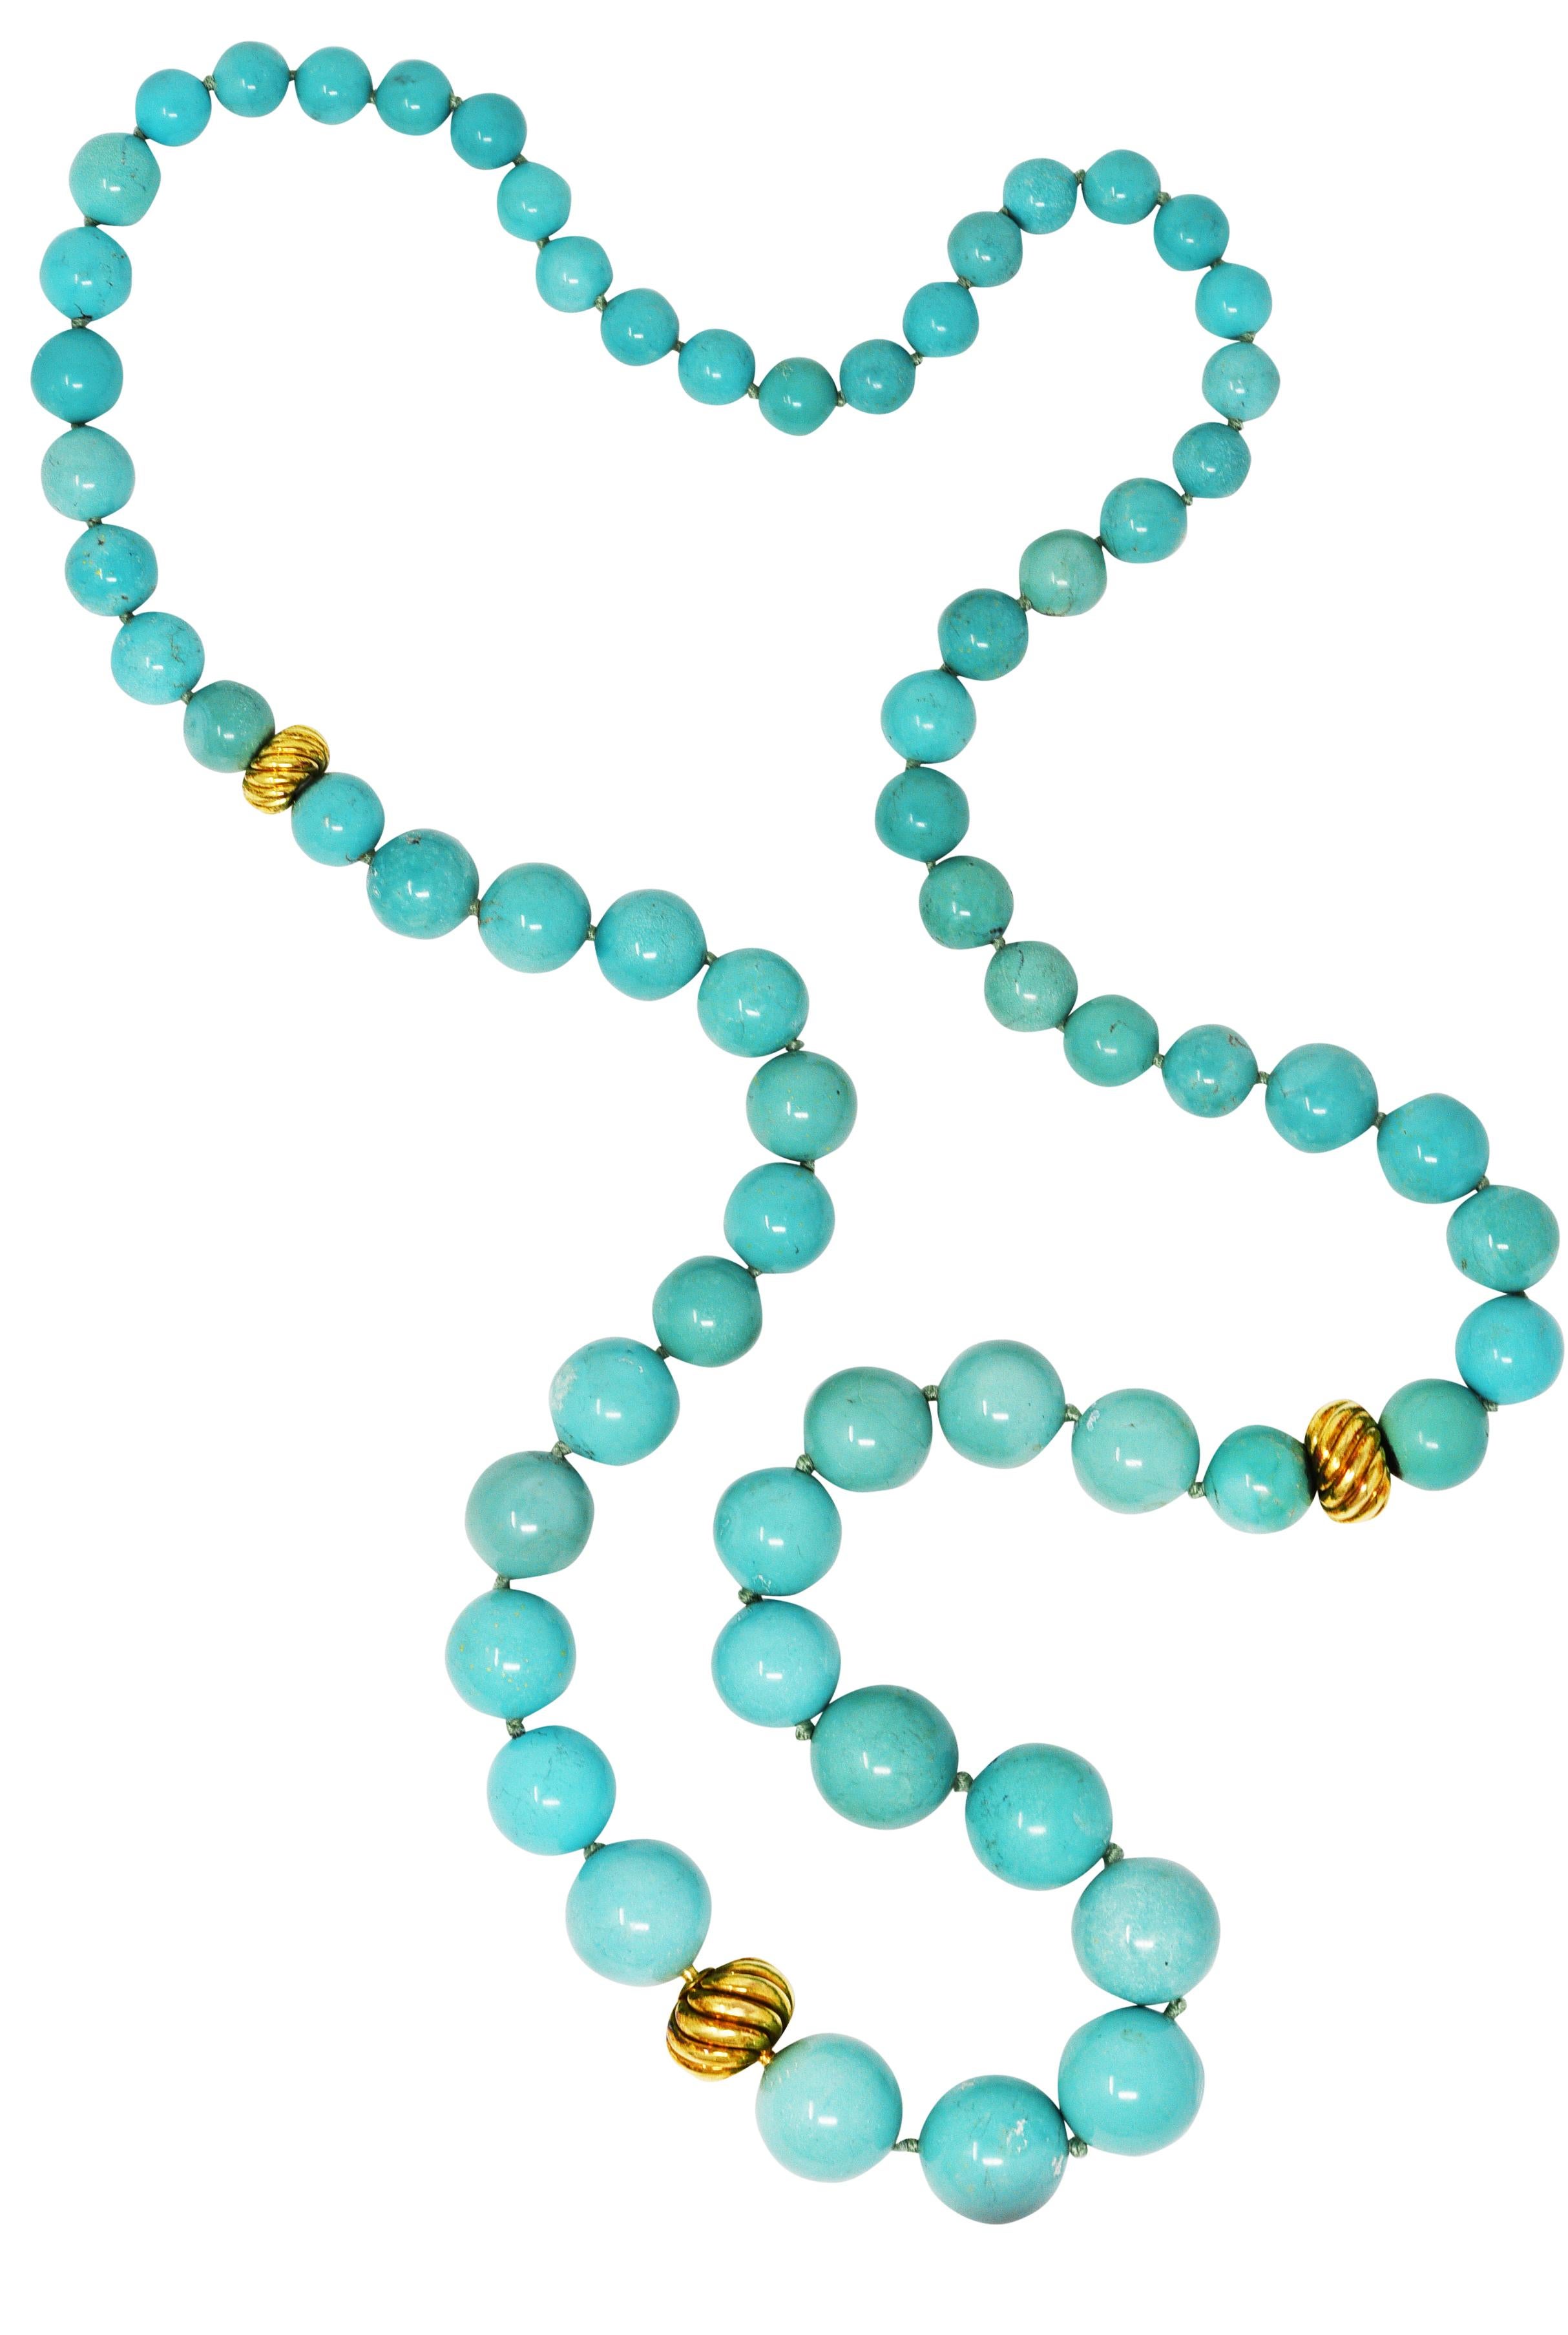 Necklace is comprised of round turquoise beads graduating in size from 10.0 mm to 18.0 mm. Opaque light greenish blue in color with white mottling and subtle gray, black, and brown matrix. Accented by three gold grooved twisted cable motif beads -